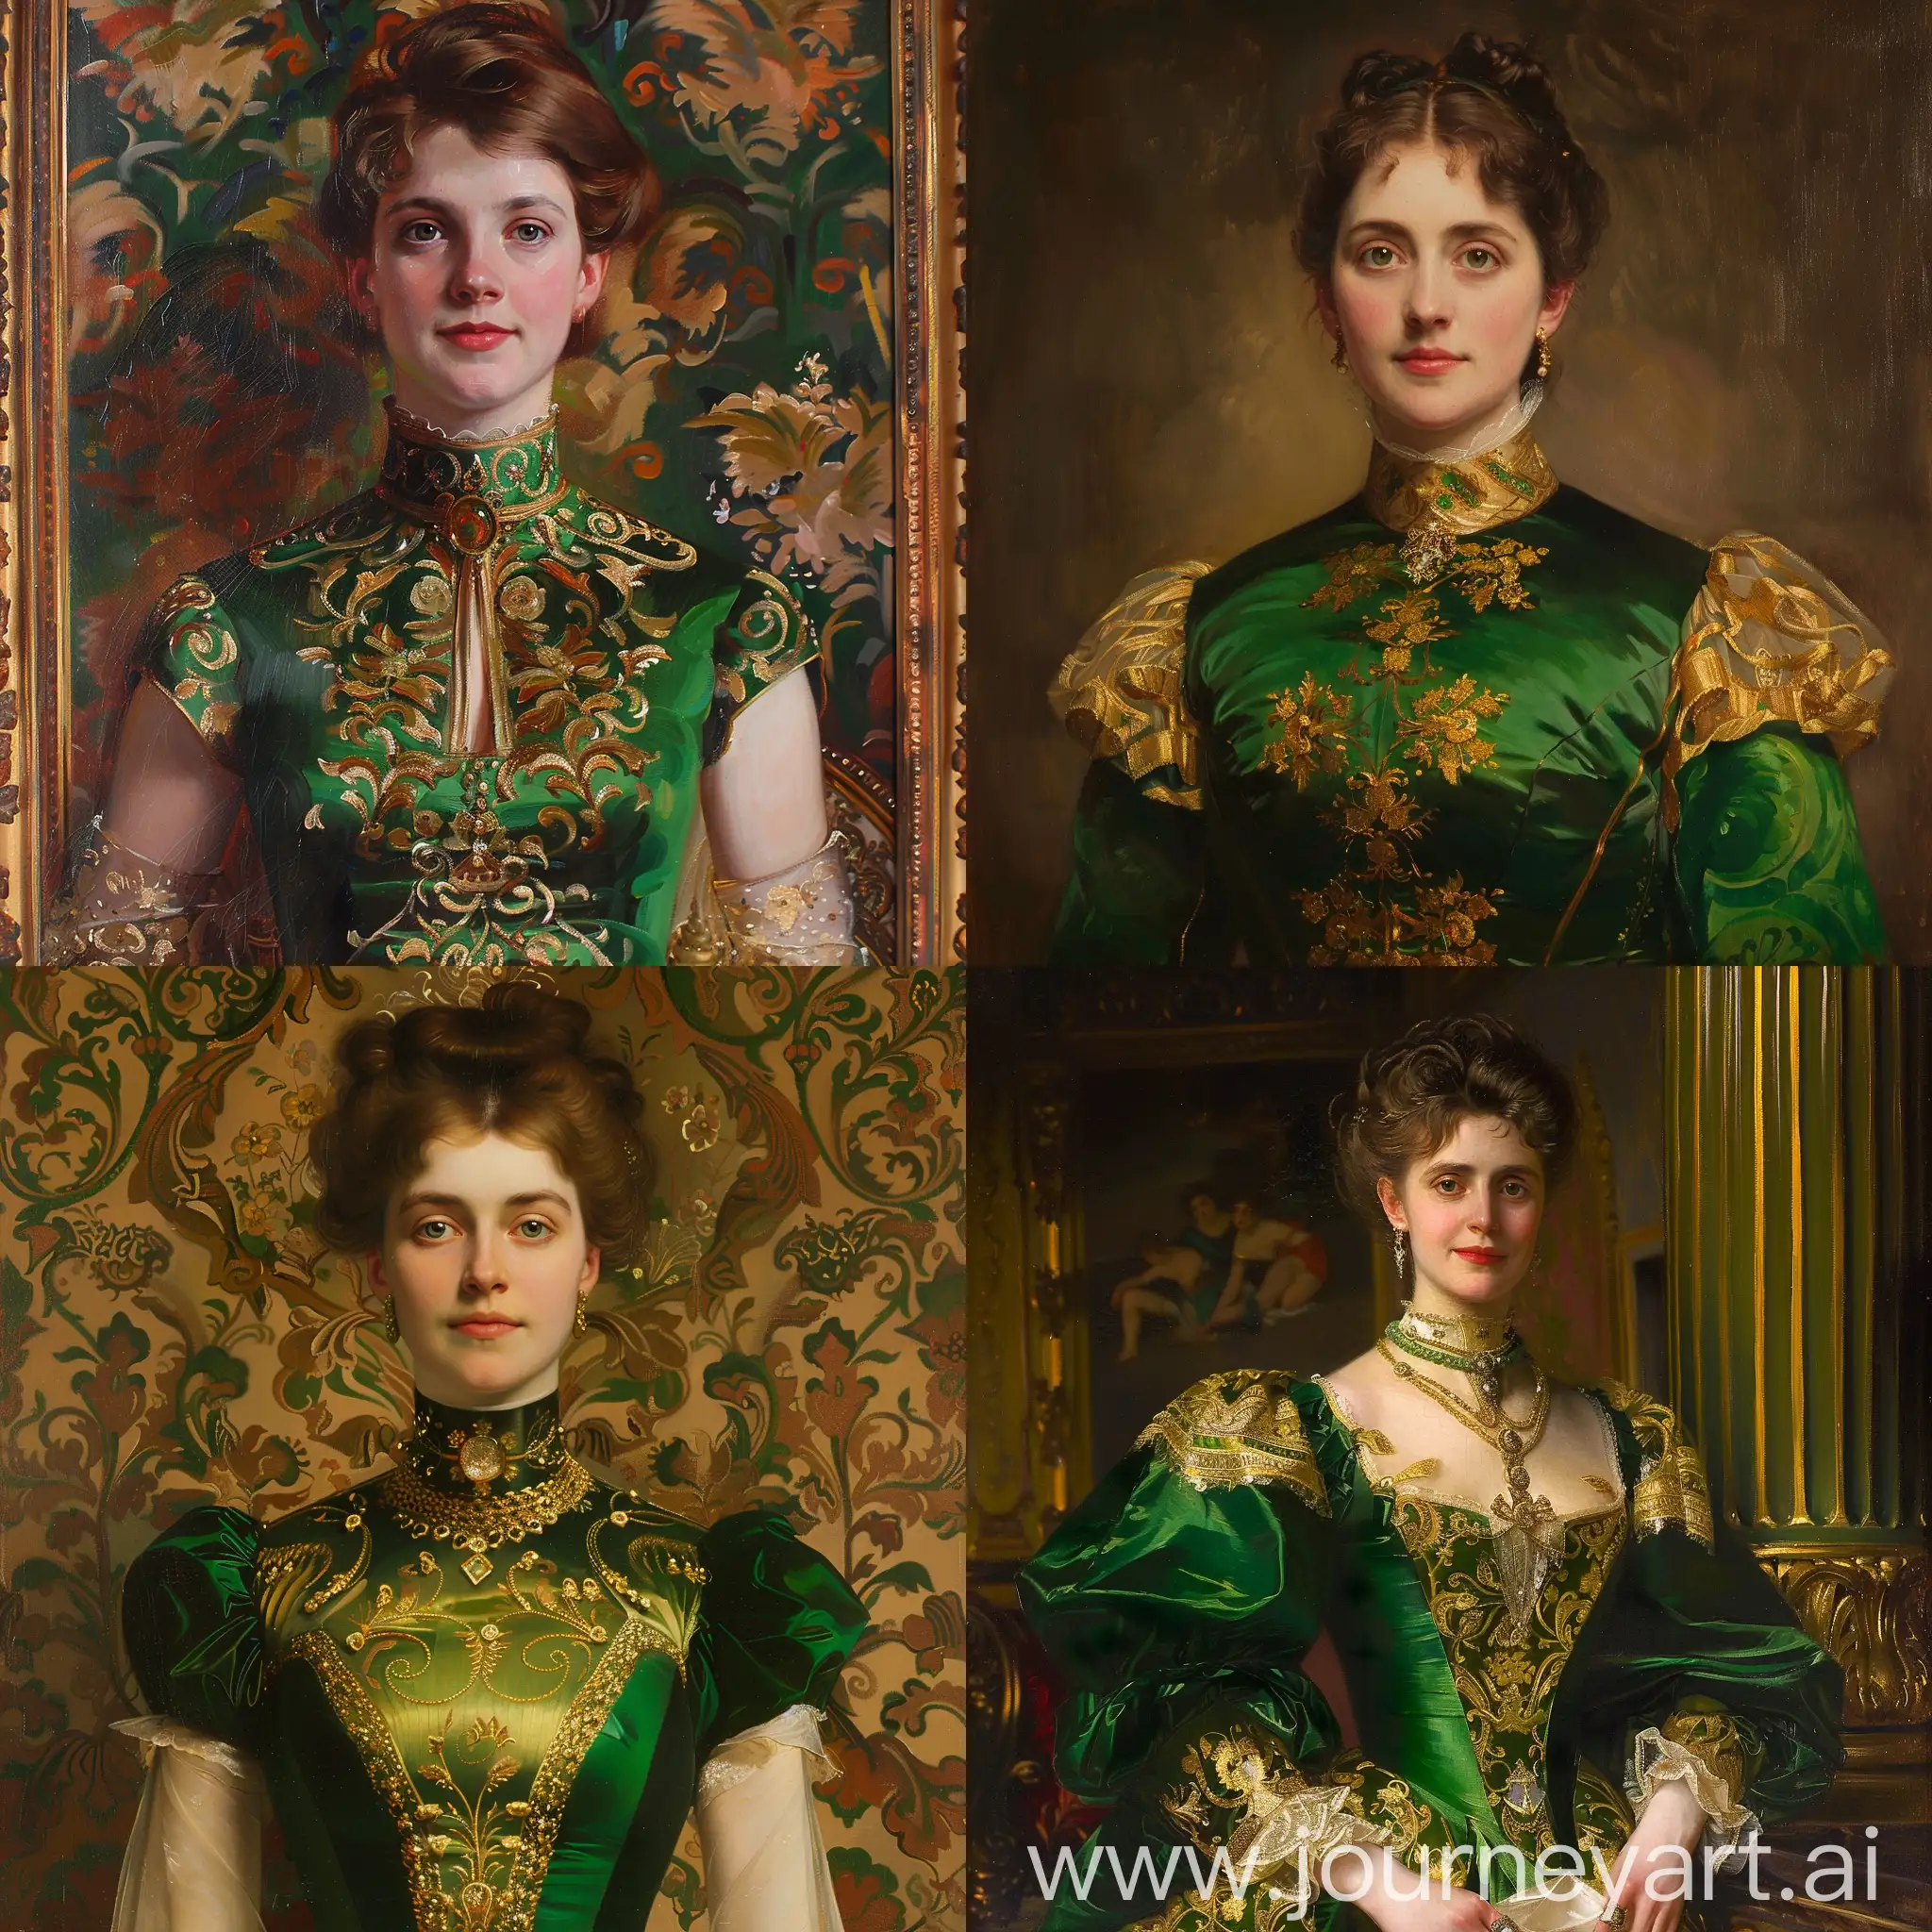 John singer sargent style baroque painting british aristocracy woman in green and gold dress high neckline